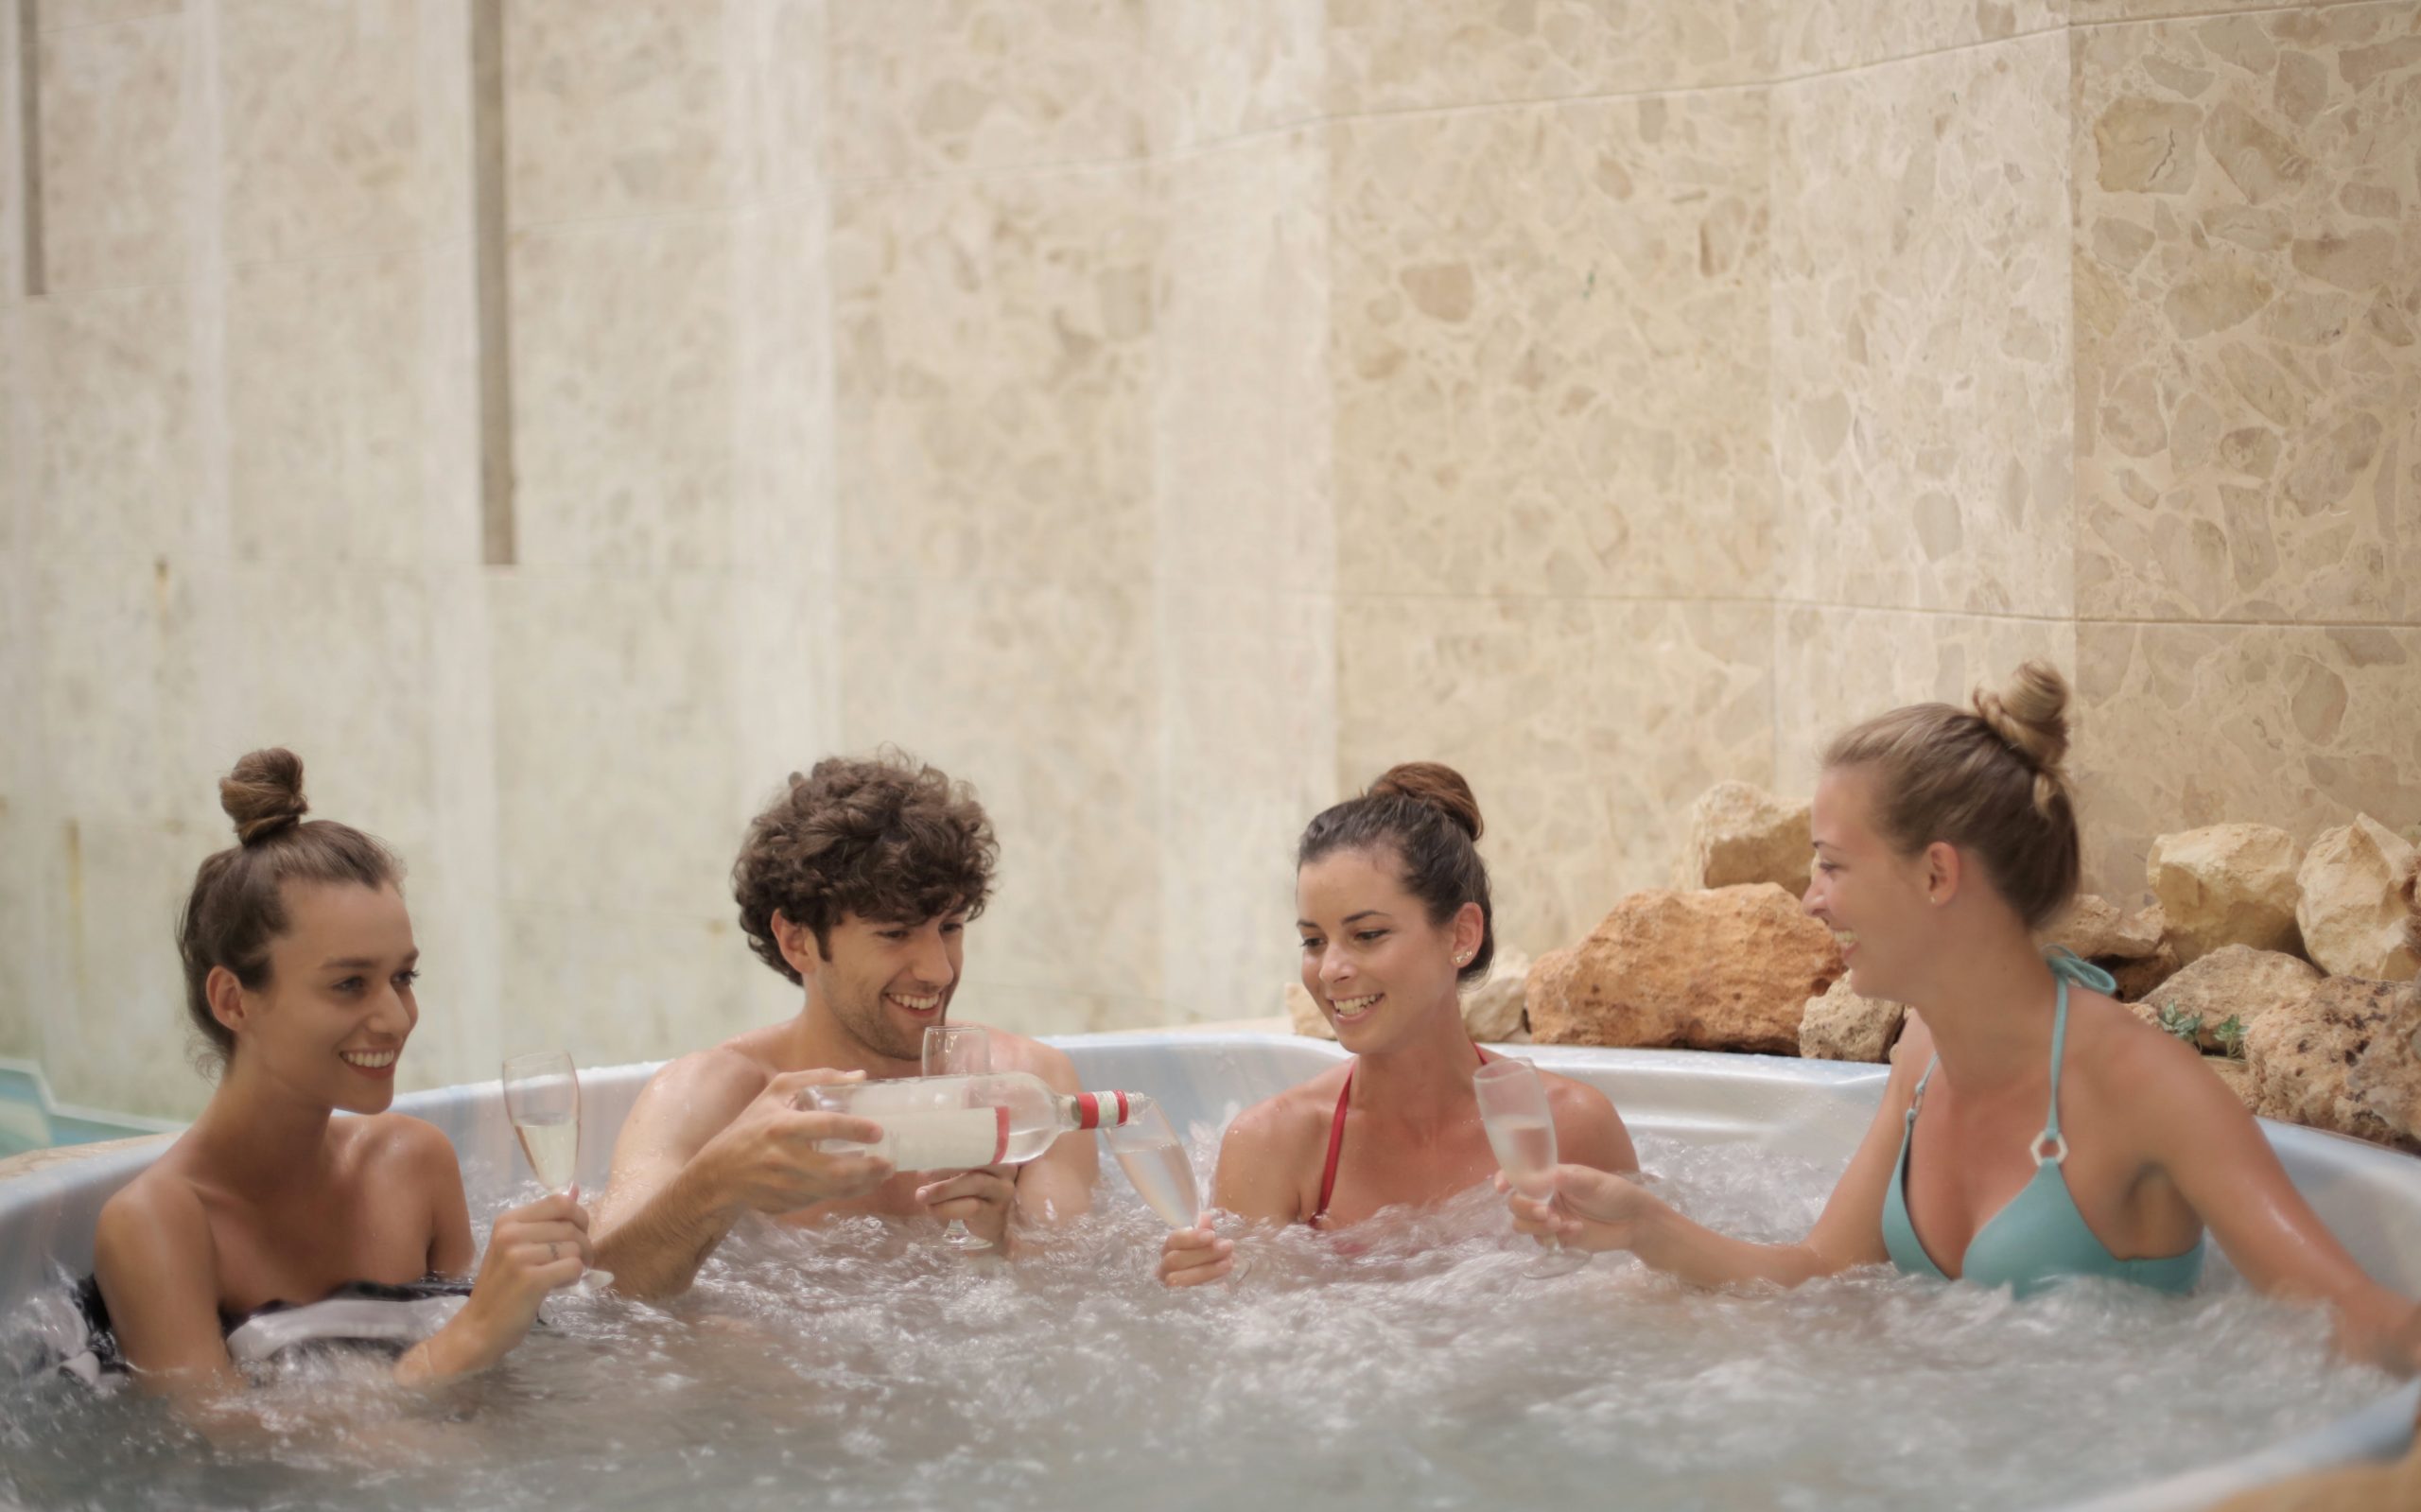 Jacuzzi suppliers in UAE